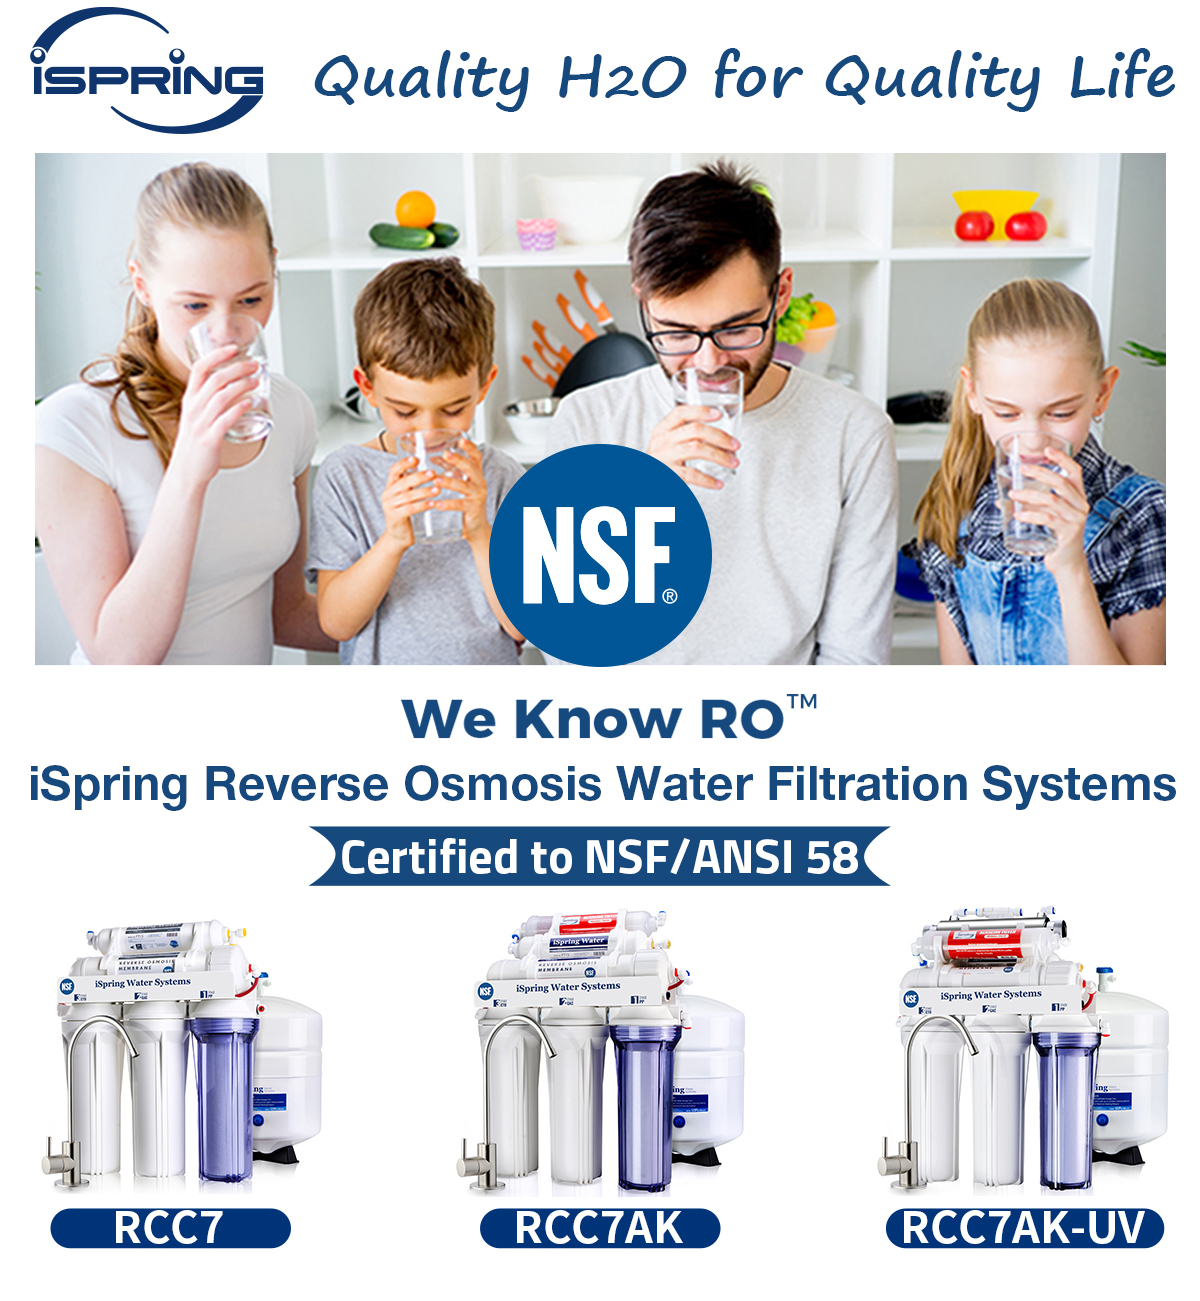 iSpring Reverse Osmosis systems with NSF/ANSI 58 Certification